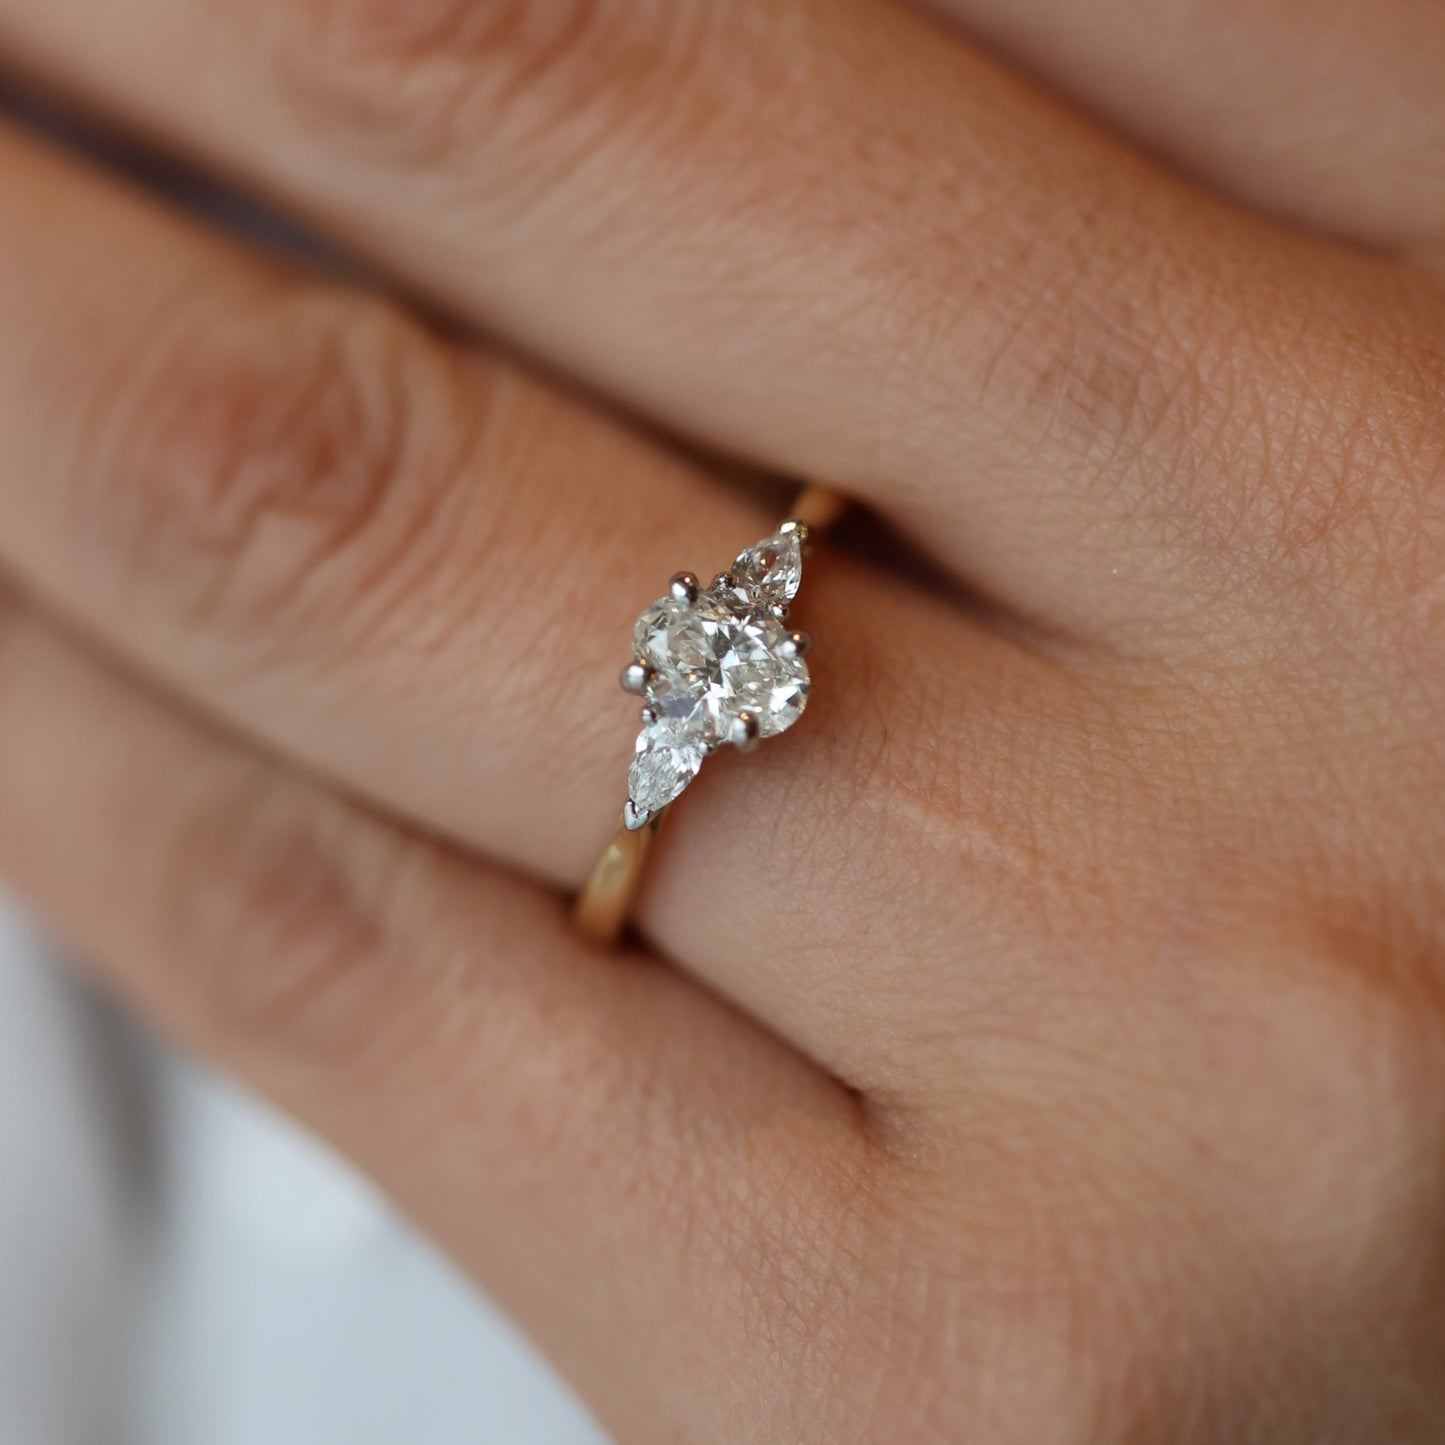 The "Tranquility" with Oval & Pear Shaped Diamonds